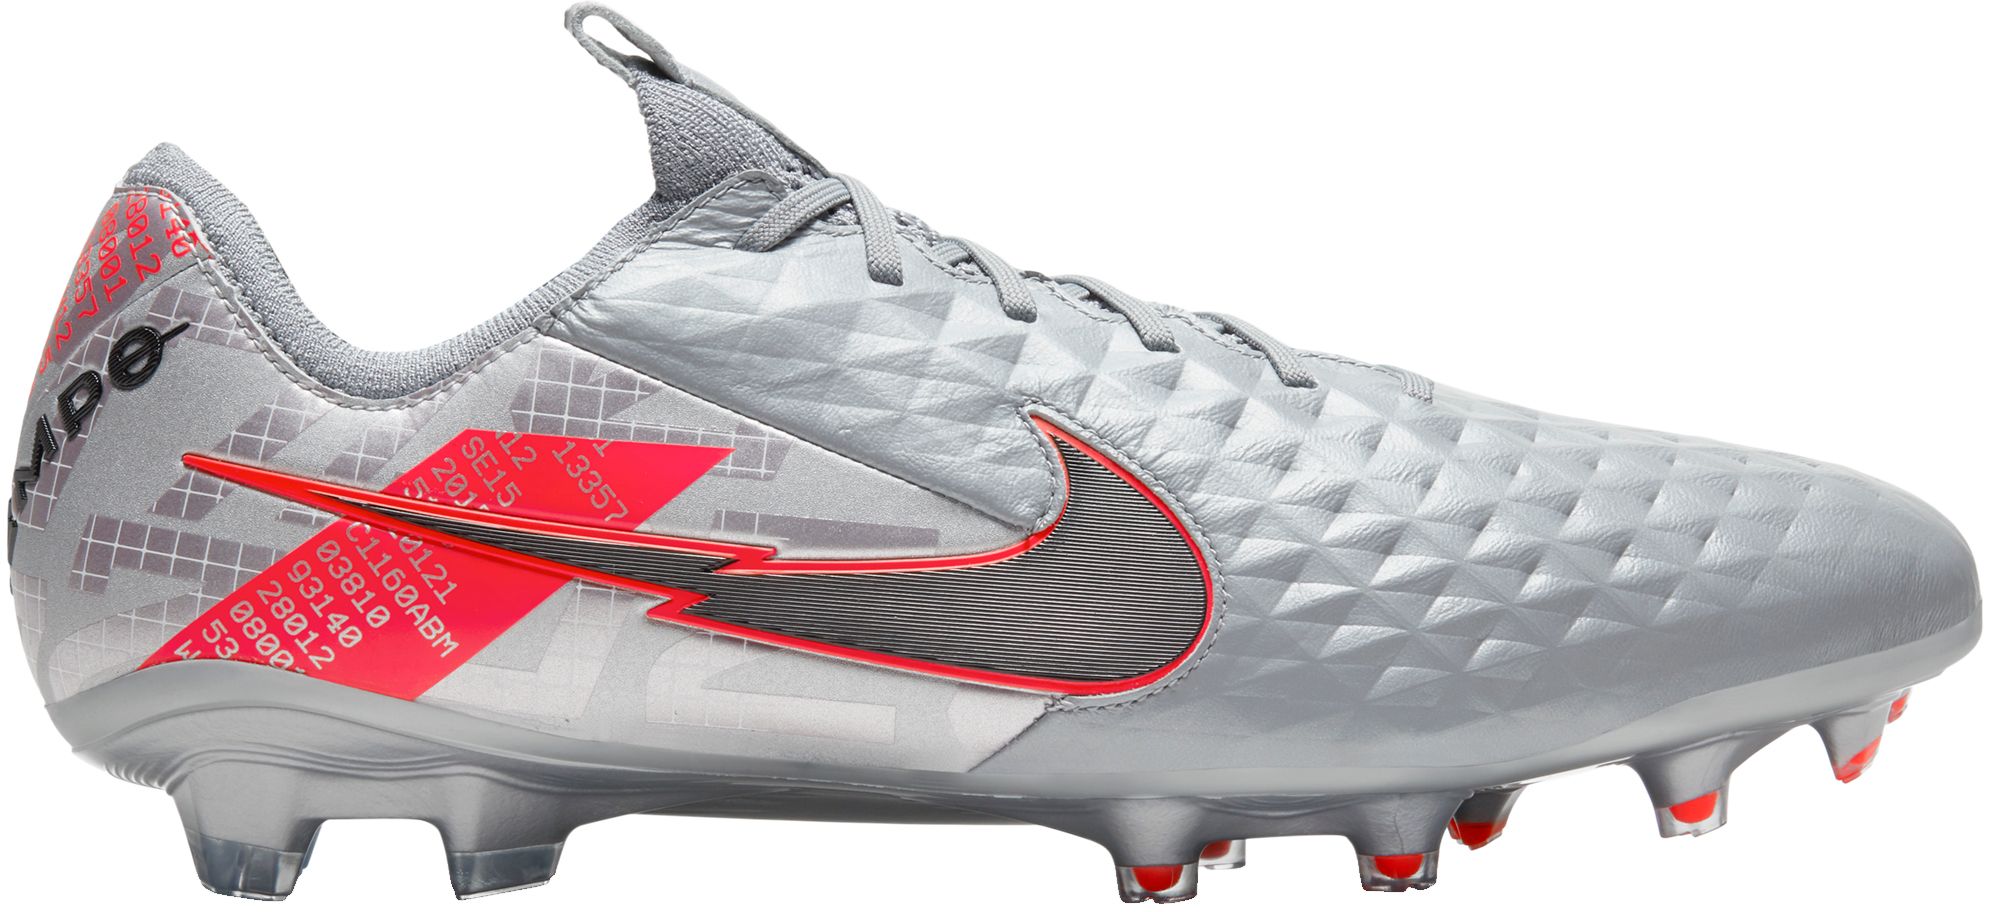 Nike Tiempo Legend 8 Elite CR7 FG Soccer Cleats | DICK'S Sporting Goods